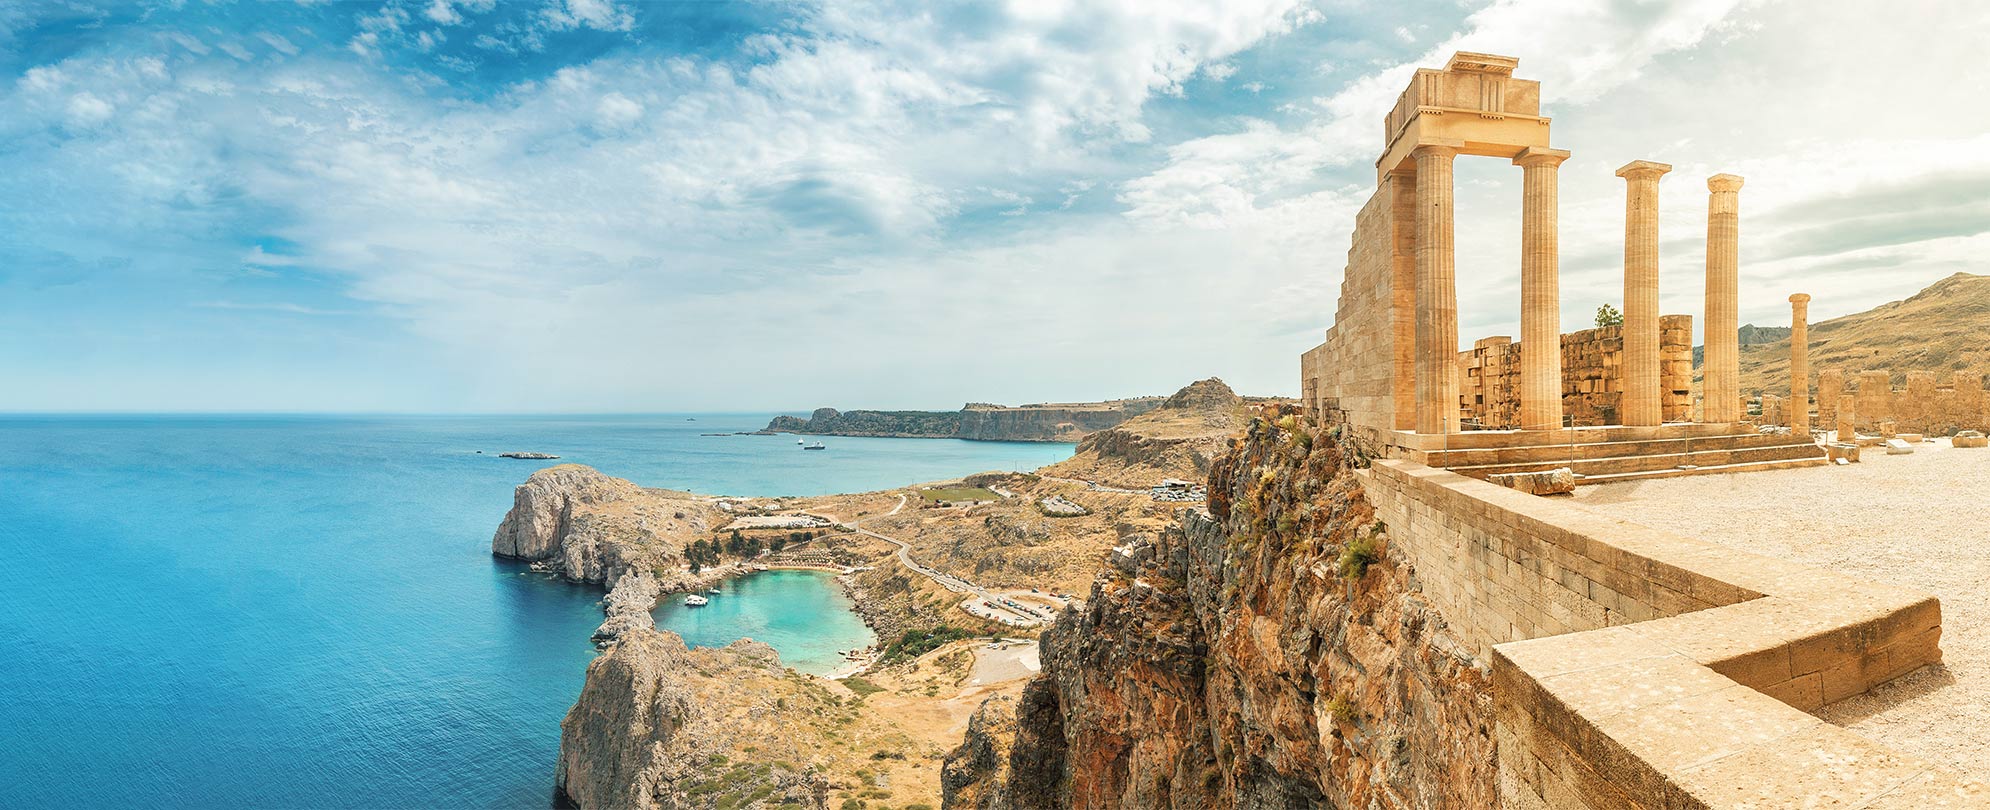 The Lindos Acropolis in Rhodes, Greece one of the stops on a 9-night Mediterranean cruise.